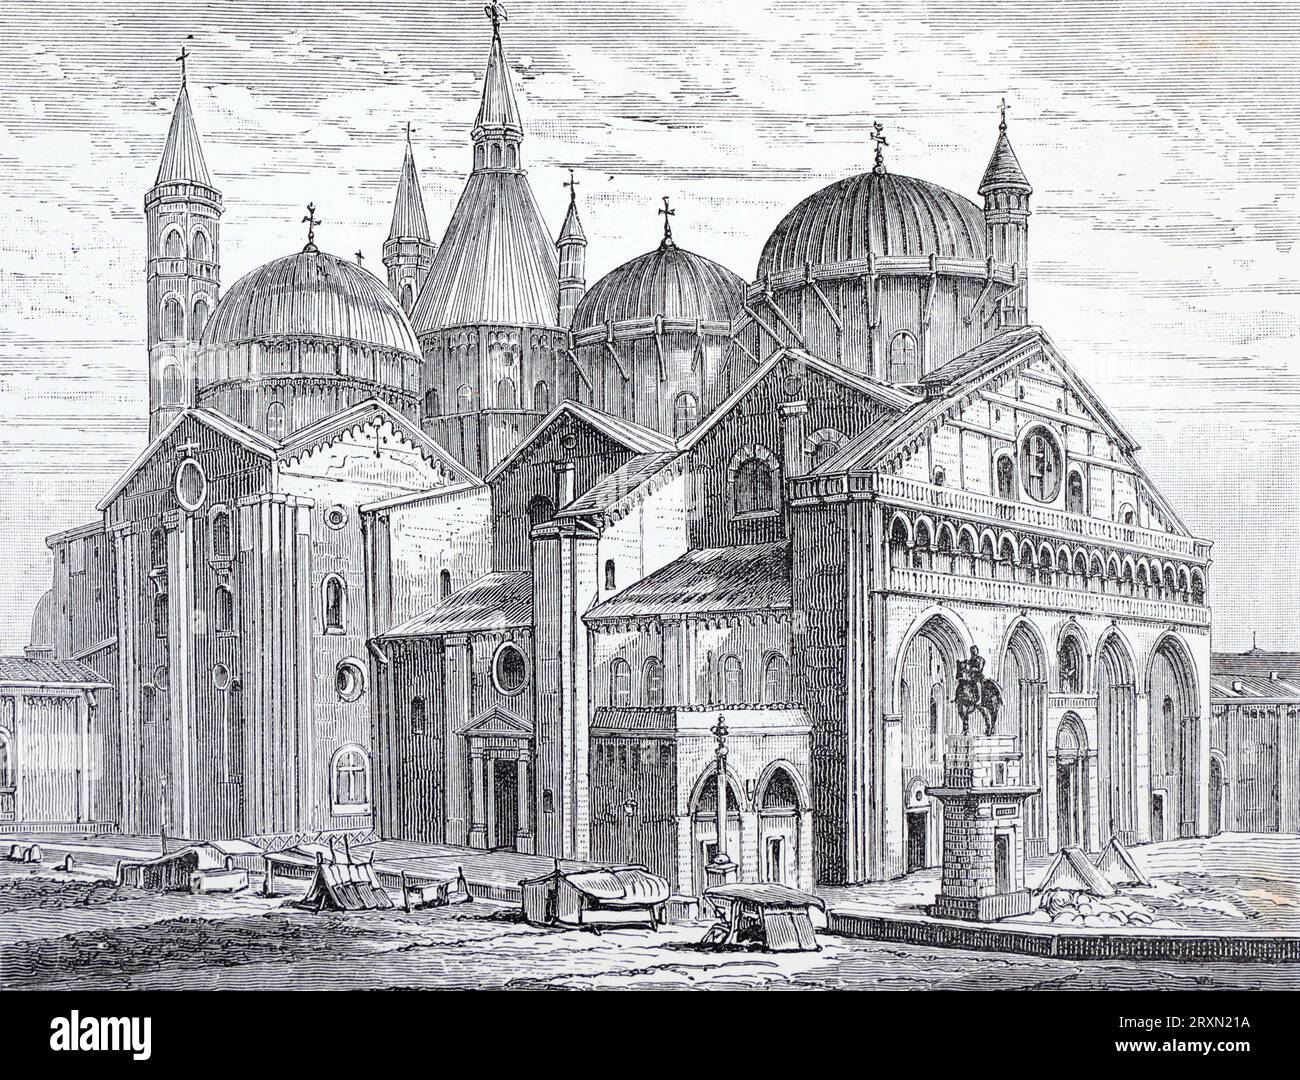 Church of St Anthony in Padua, Italy in the 19th century. Engraving from Lives of the Saints by Sabin Baring-Gould published in 1897. Stock Photo